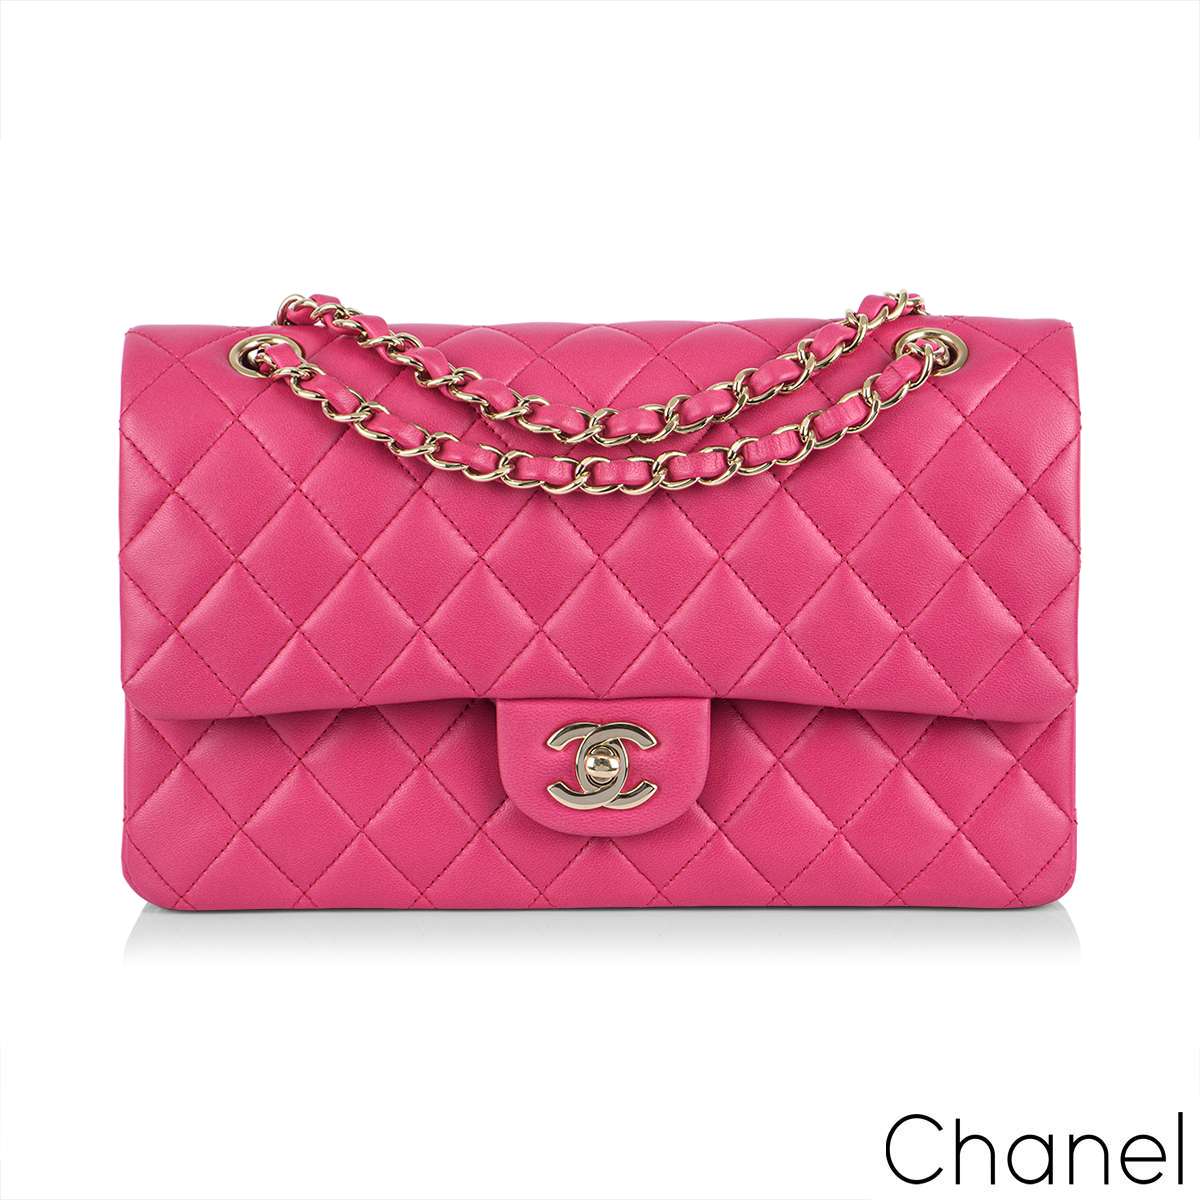 Pink Chanel Classic Flap, Louboutin Pigalle Follies, Pre-owned